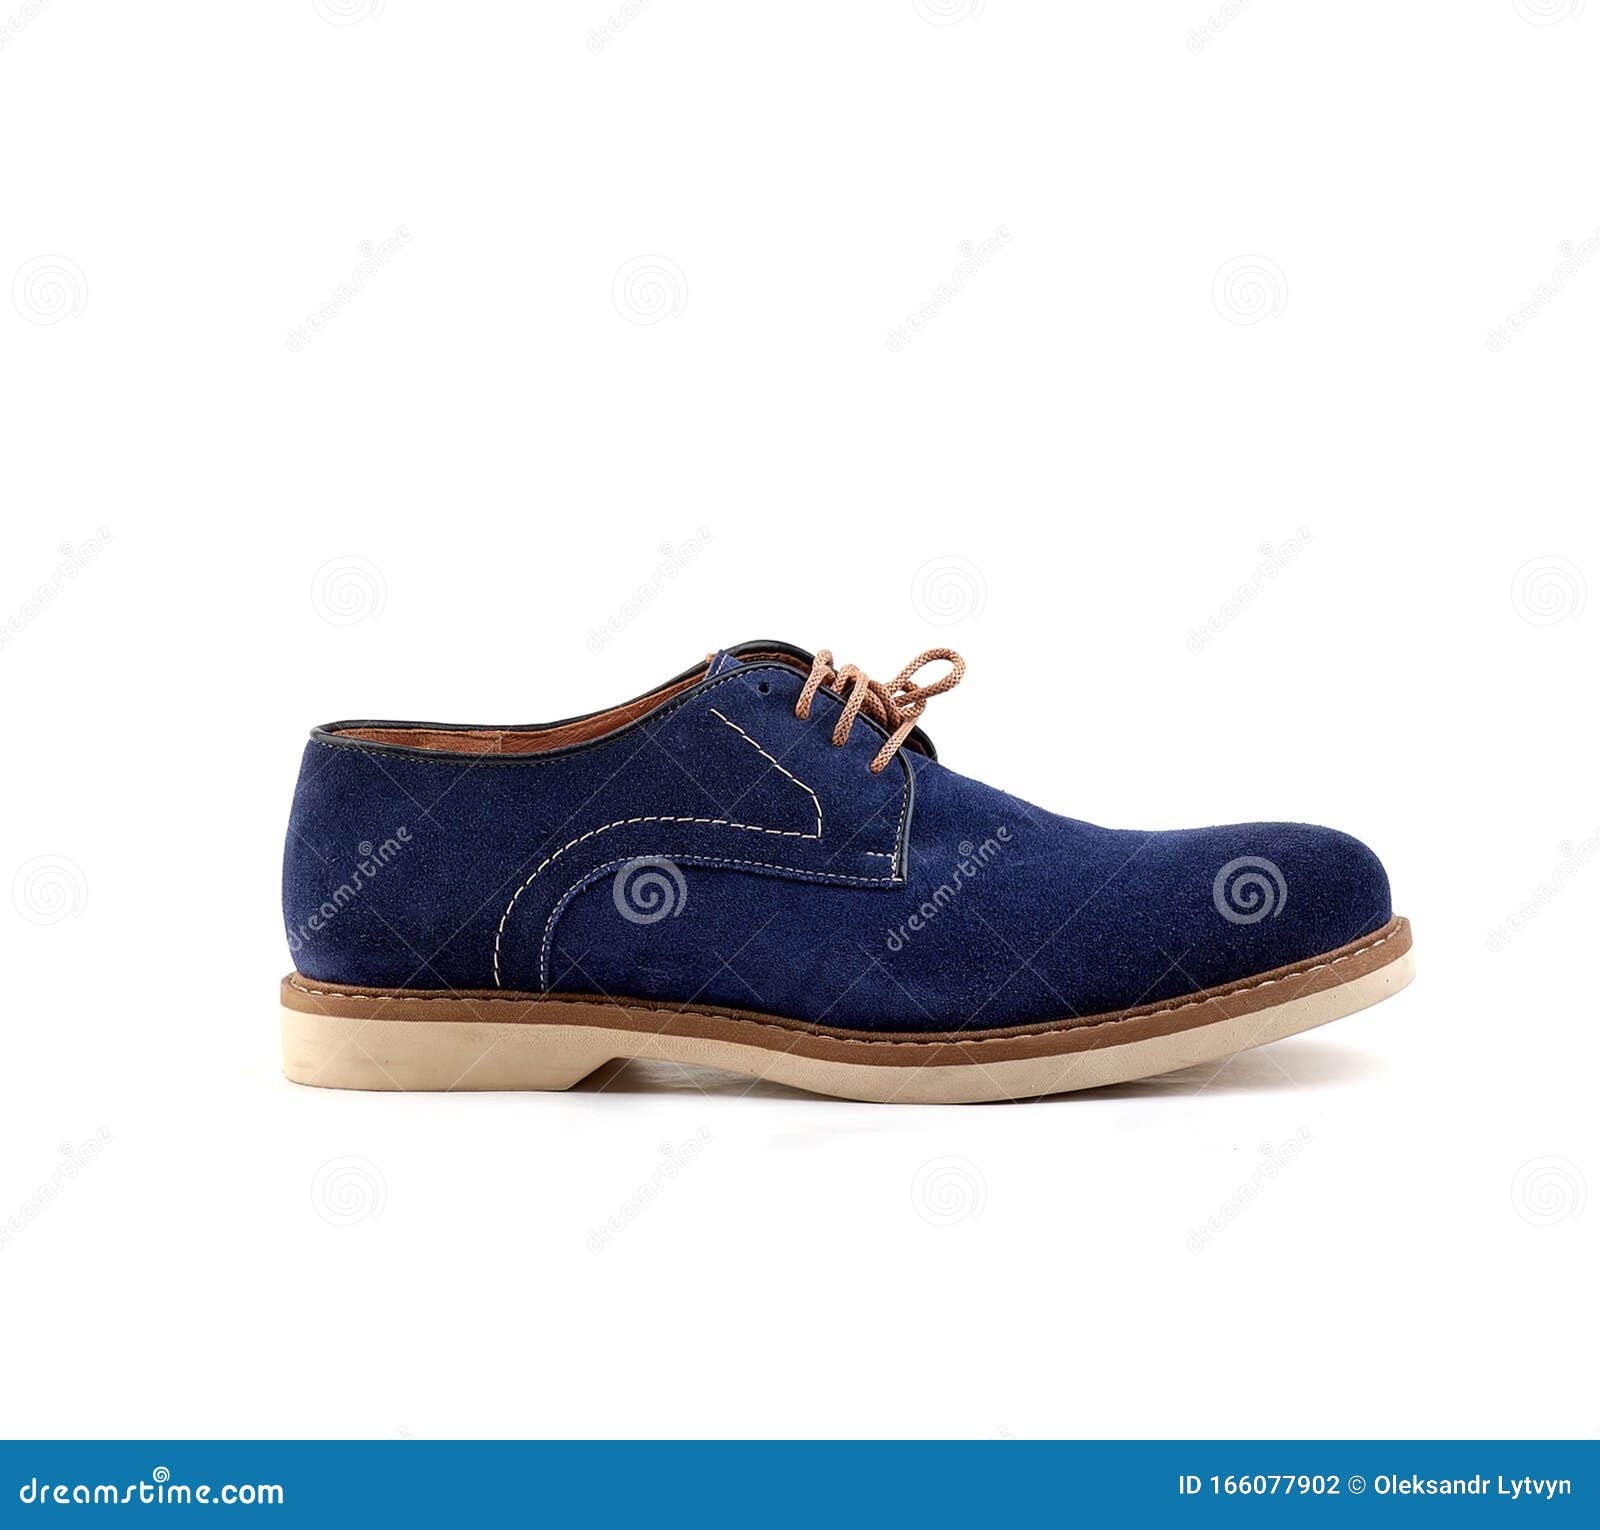 Blue Suede Shoes Isolated on White Background Stock Photo - Image of ...